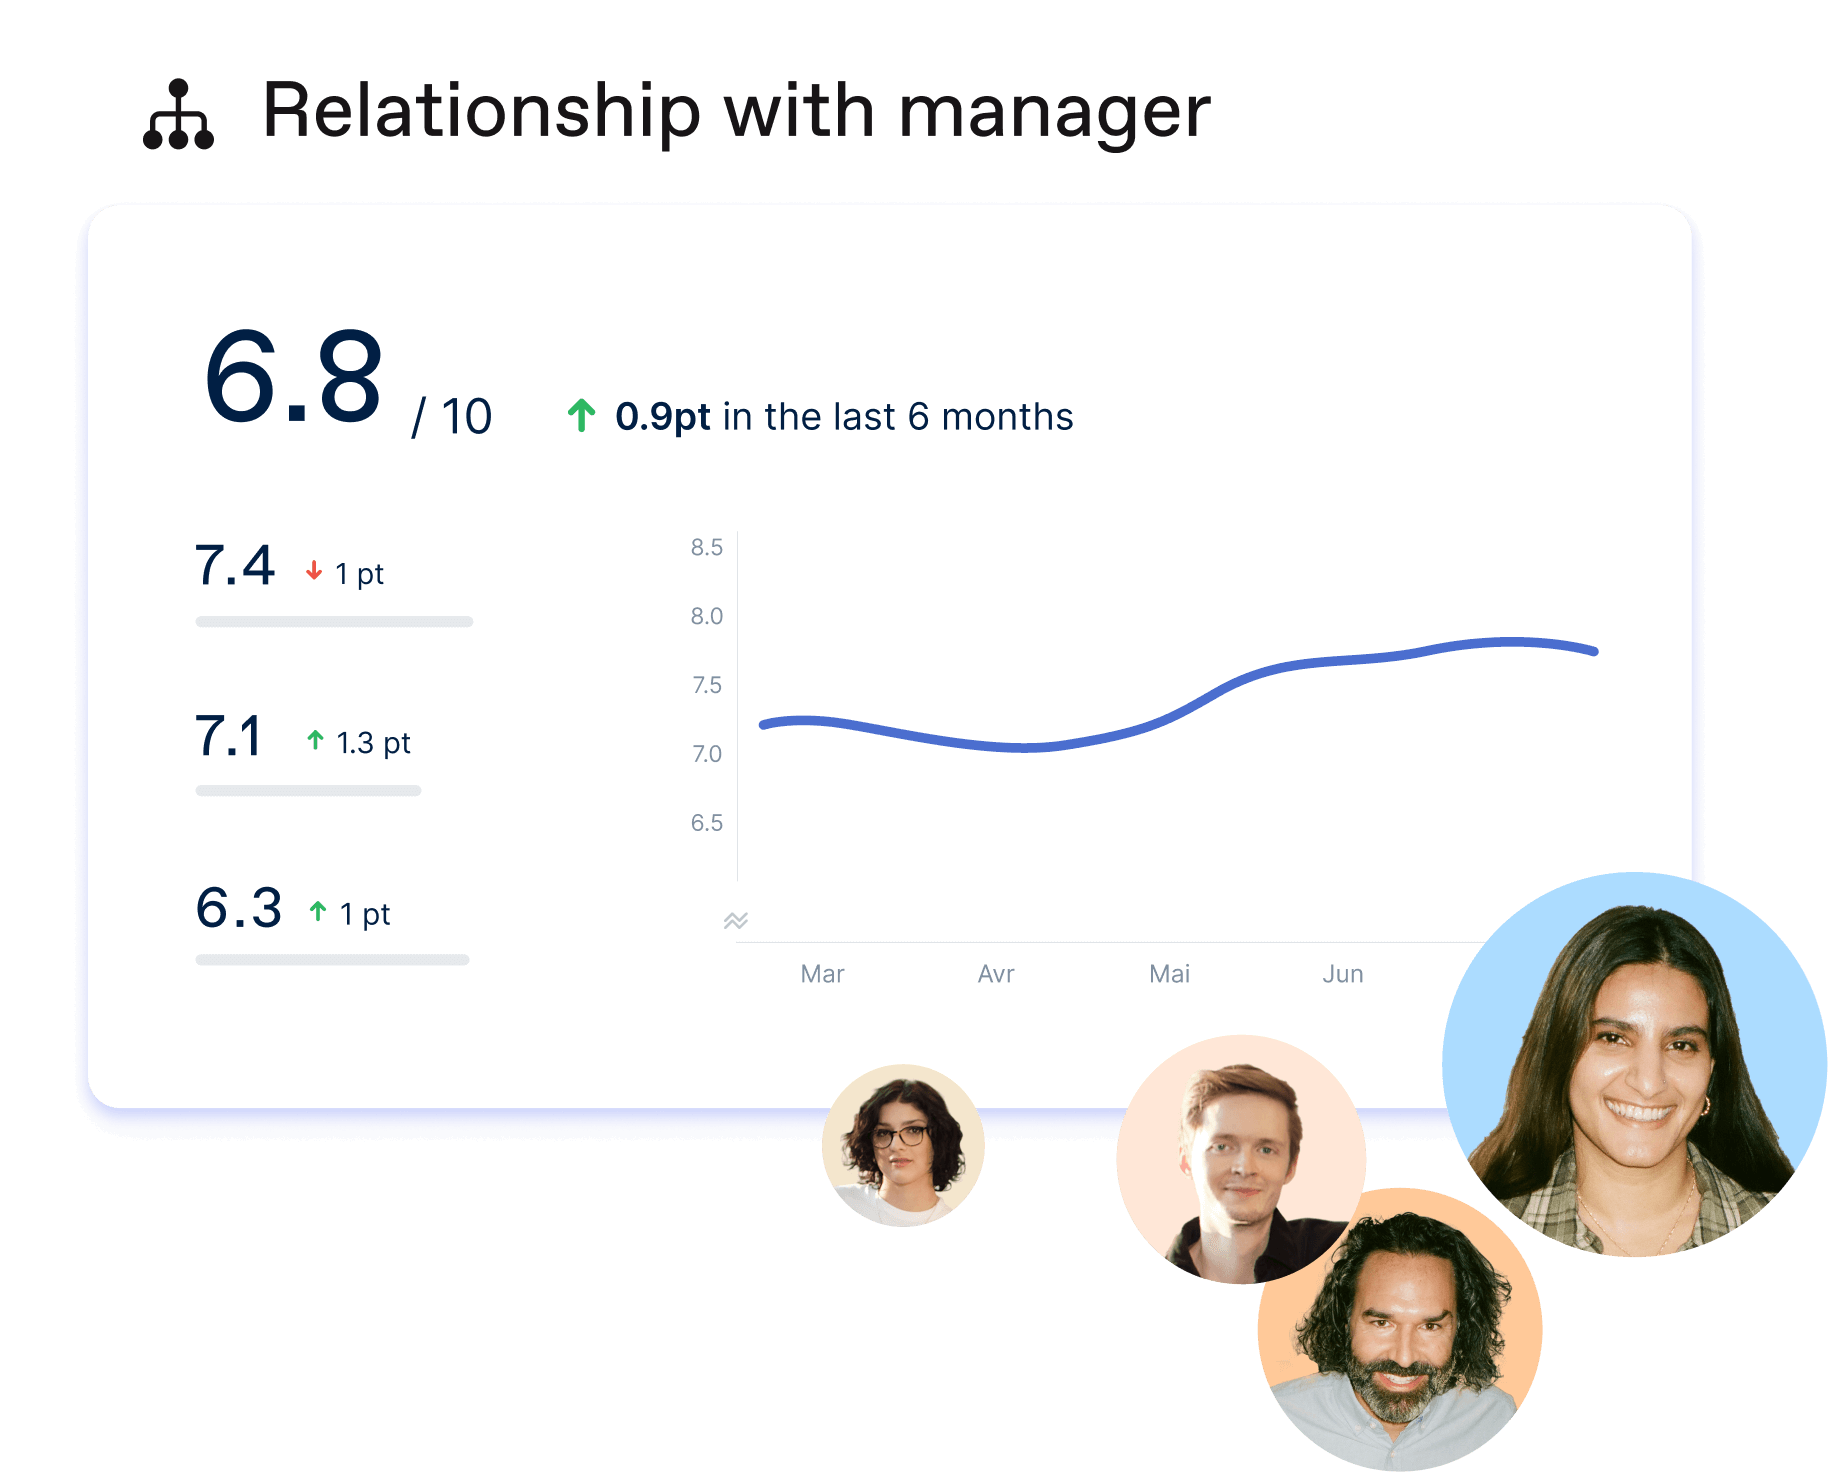 A report that shows growth in terms of relationships with managers